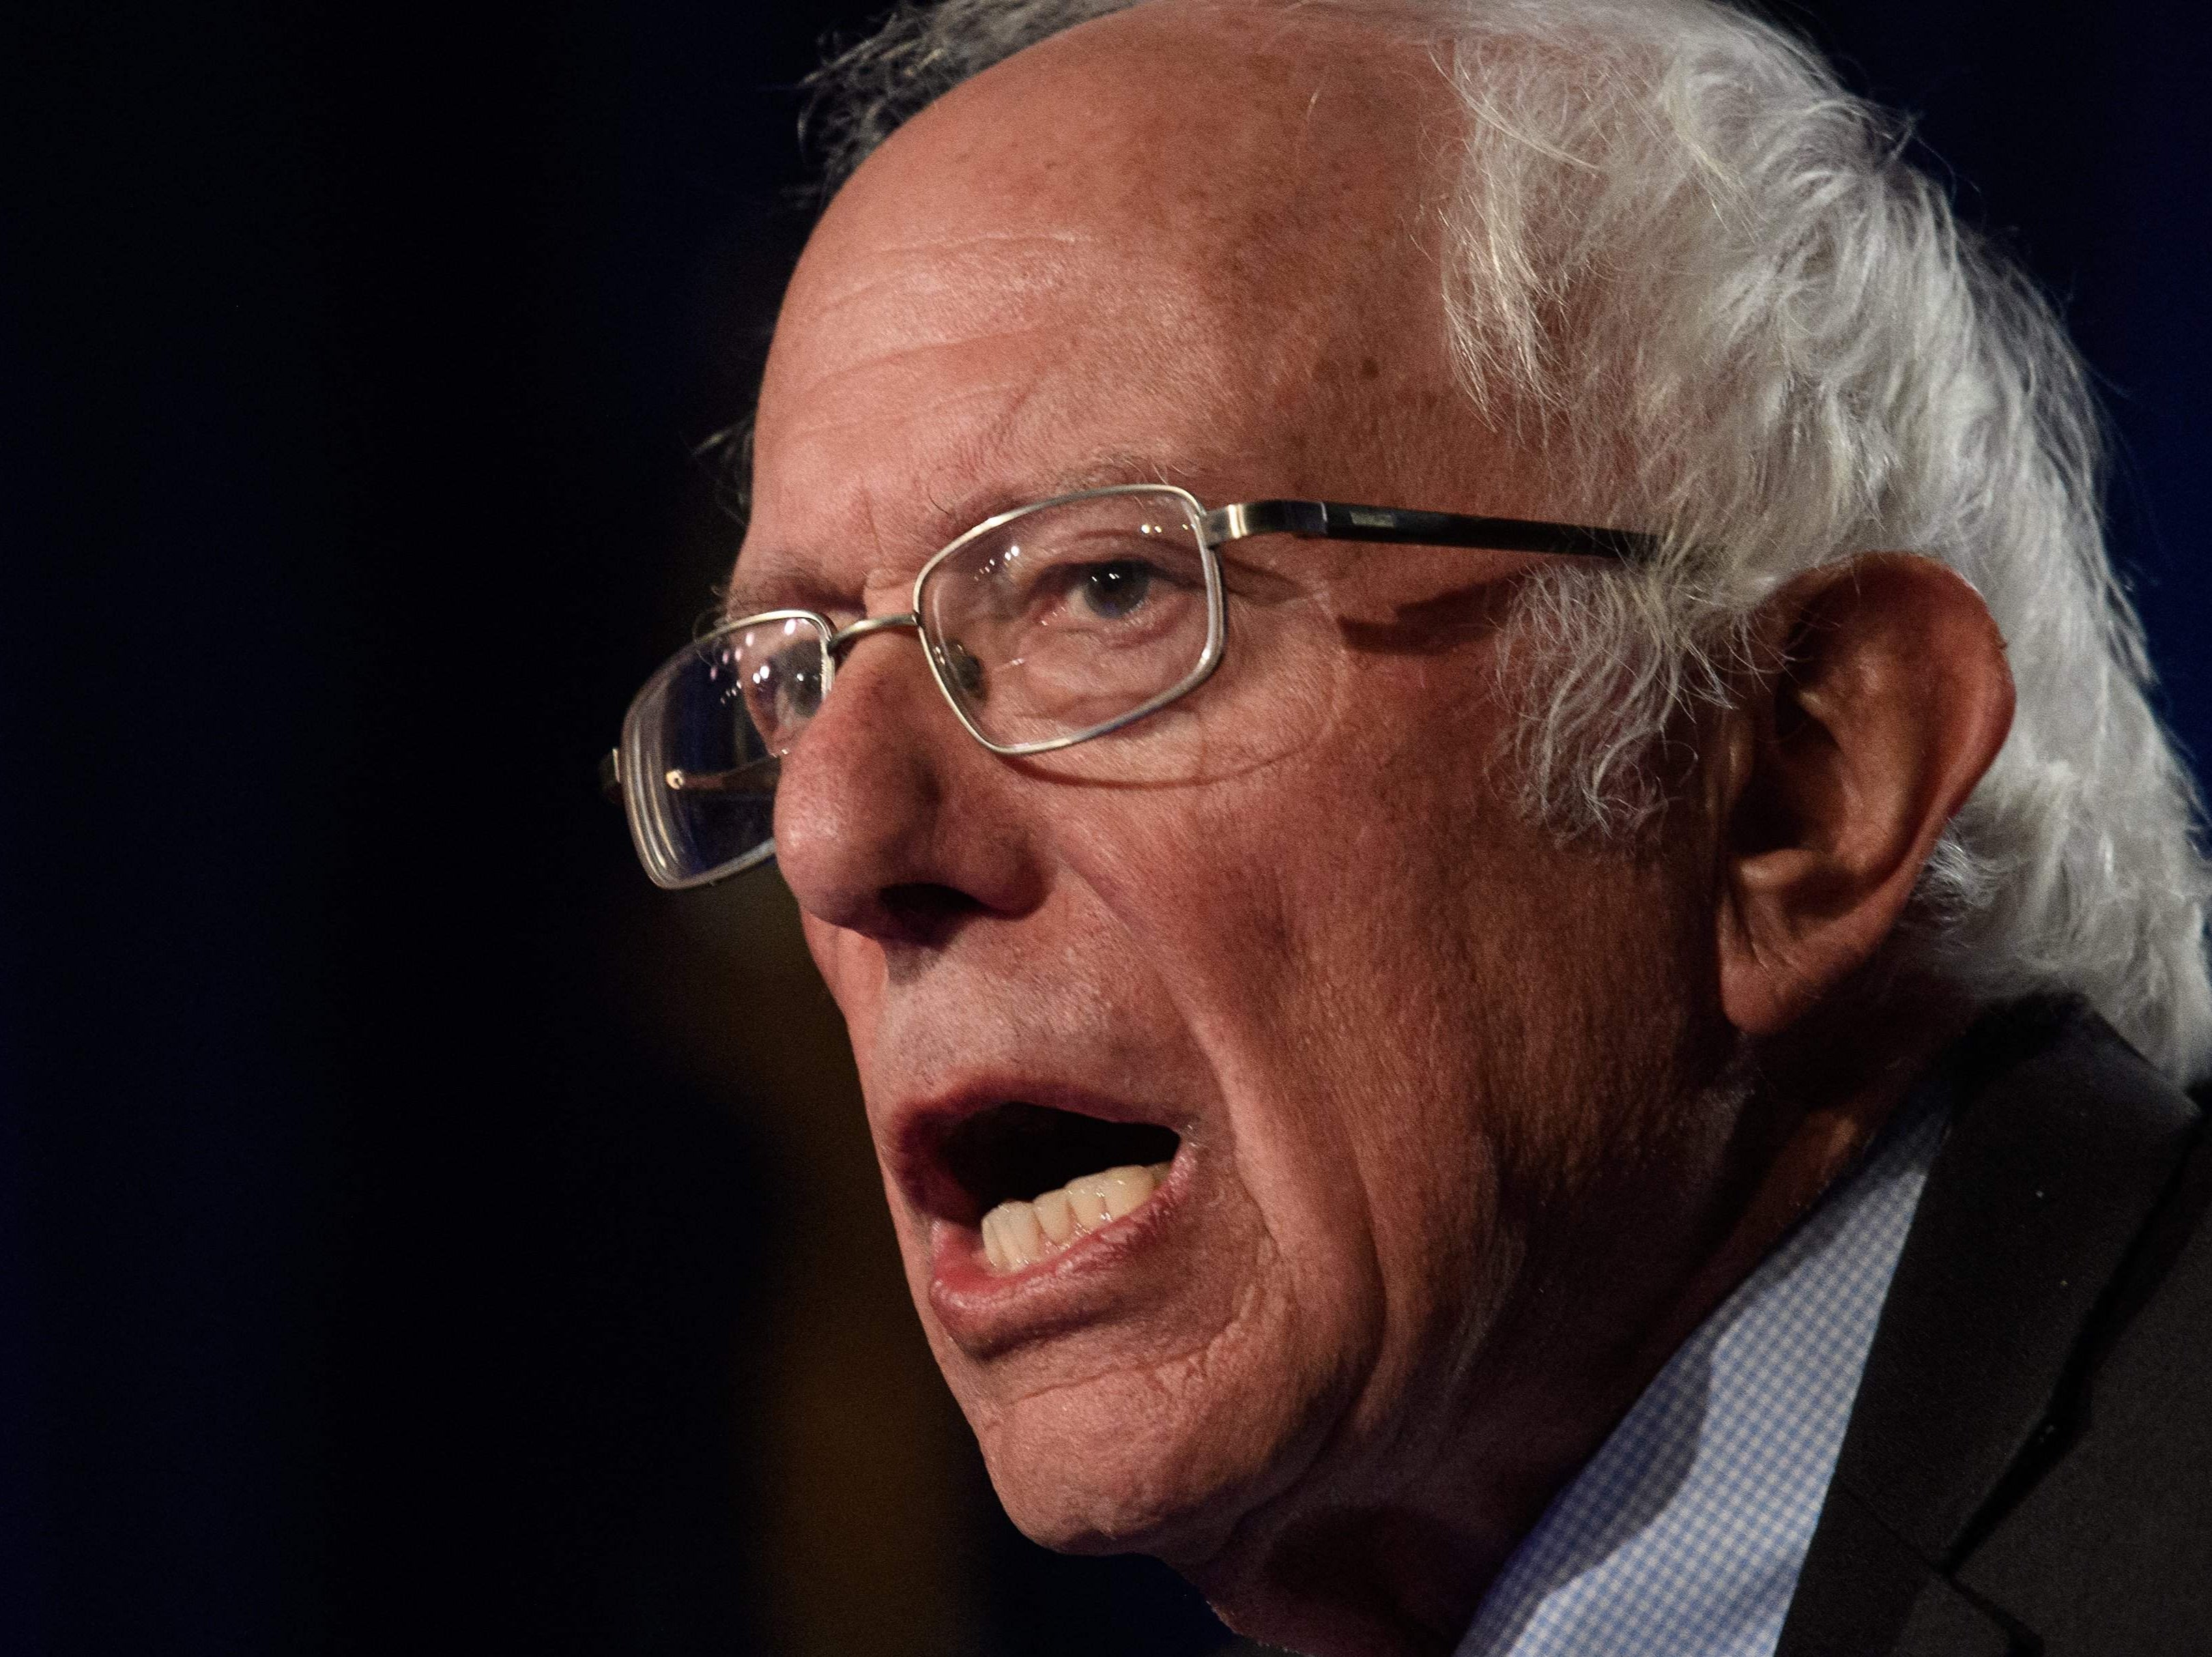 Bernie Sanders has contrasted the stagnant level of pay with the vastly increased wealth of America’s richest people